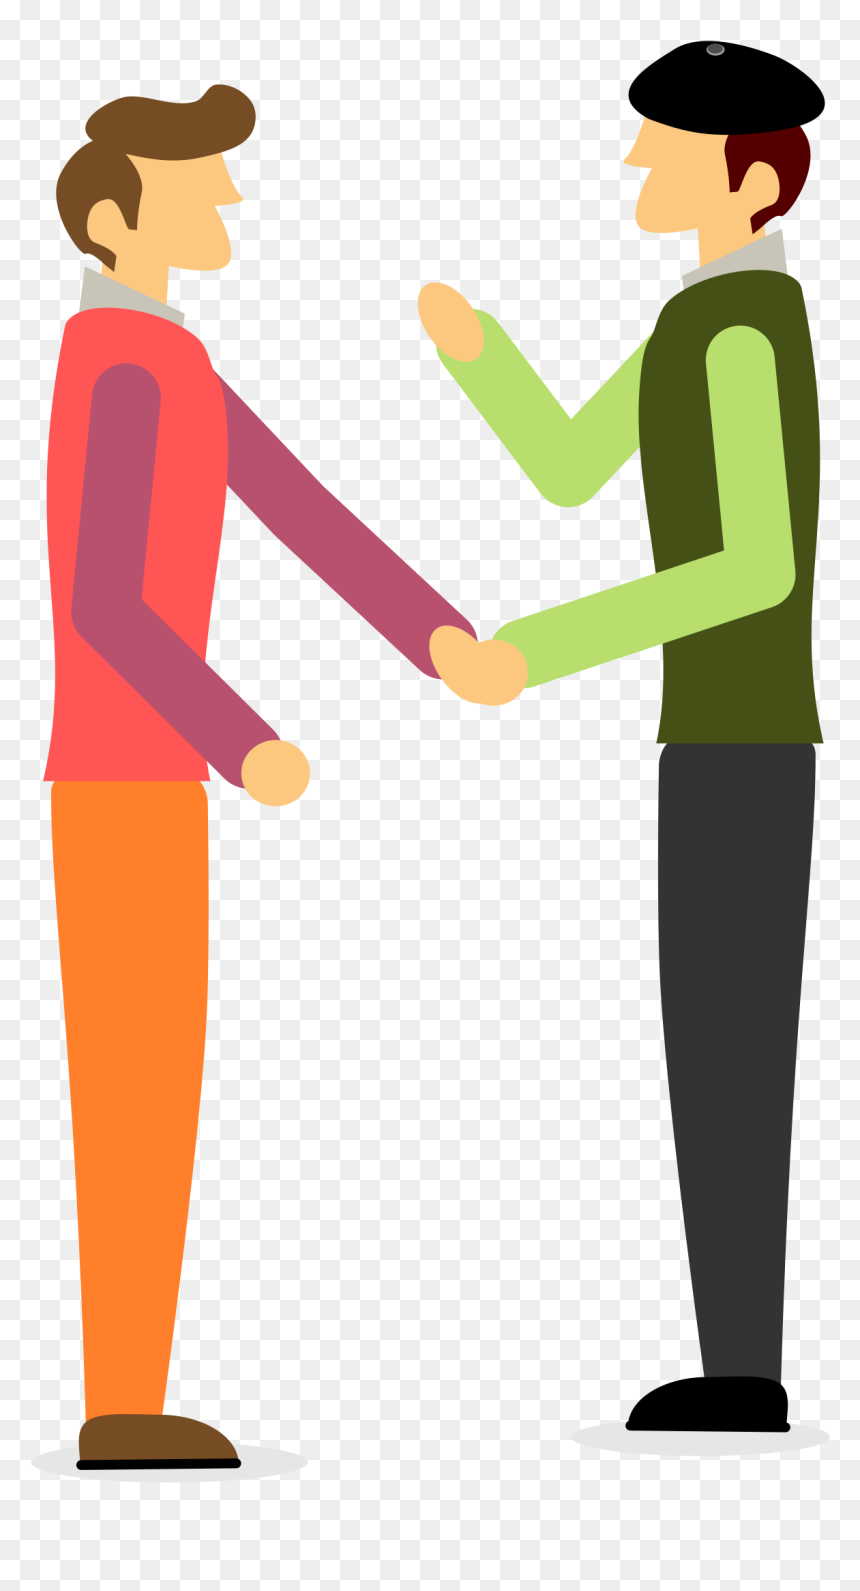 silhouette of people shaking hands - Clip Art Library - Clip Art Library